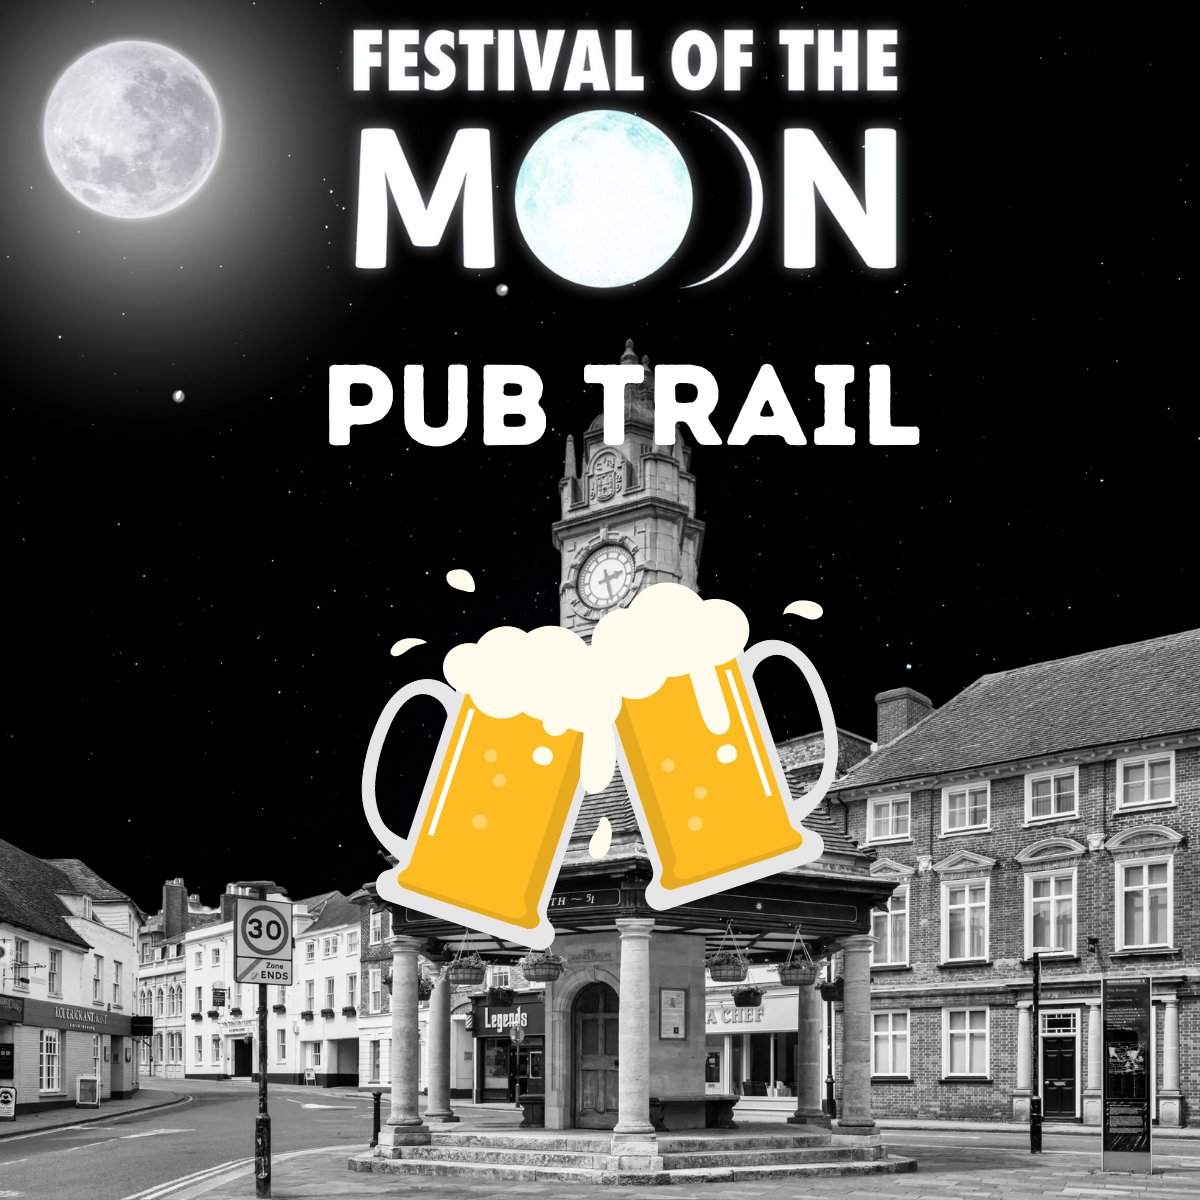 Still time to visit 8 or 16 pubs in Newbury town centre to enter the draw for some fantastic prizes including VIP tickets for the @NewburyAleFest. Entries to be dropped off in the letterbox in front of our bar by COP Monday. See visitnewbury.org.uk/festival-of-th… for details. #newbeery